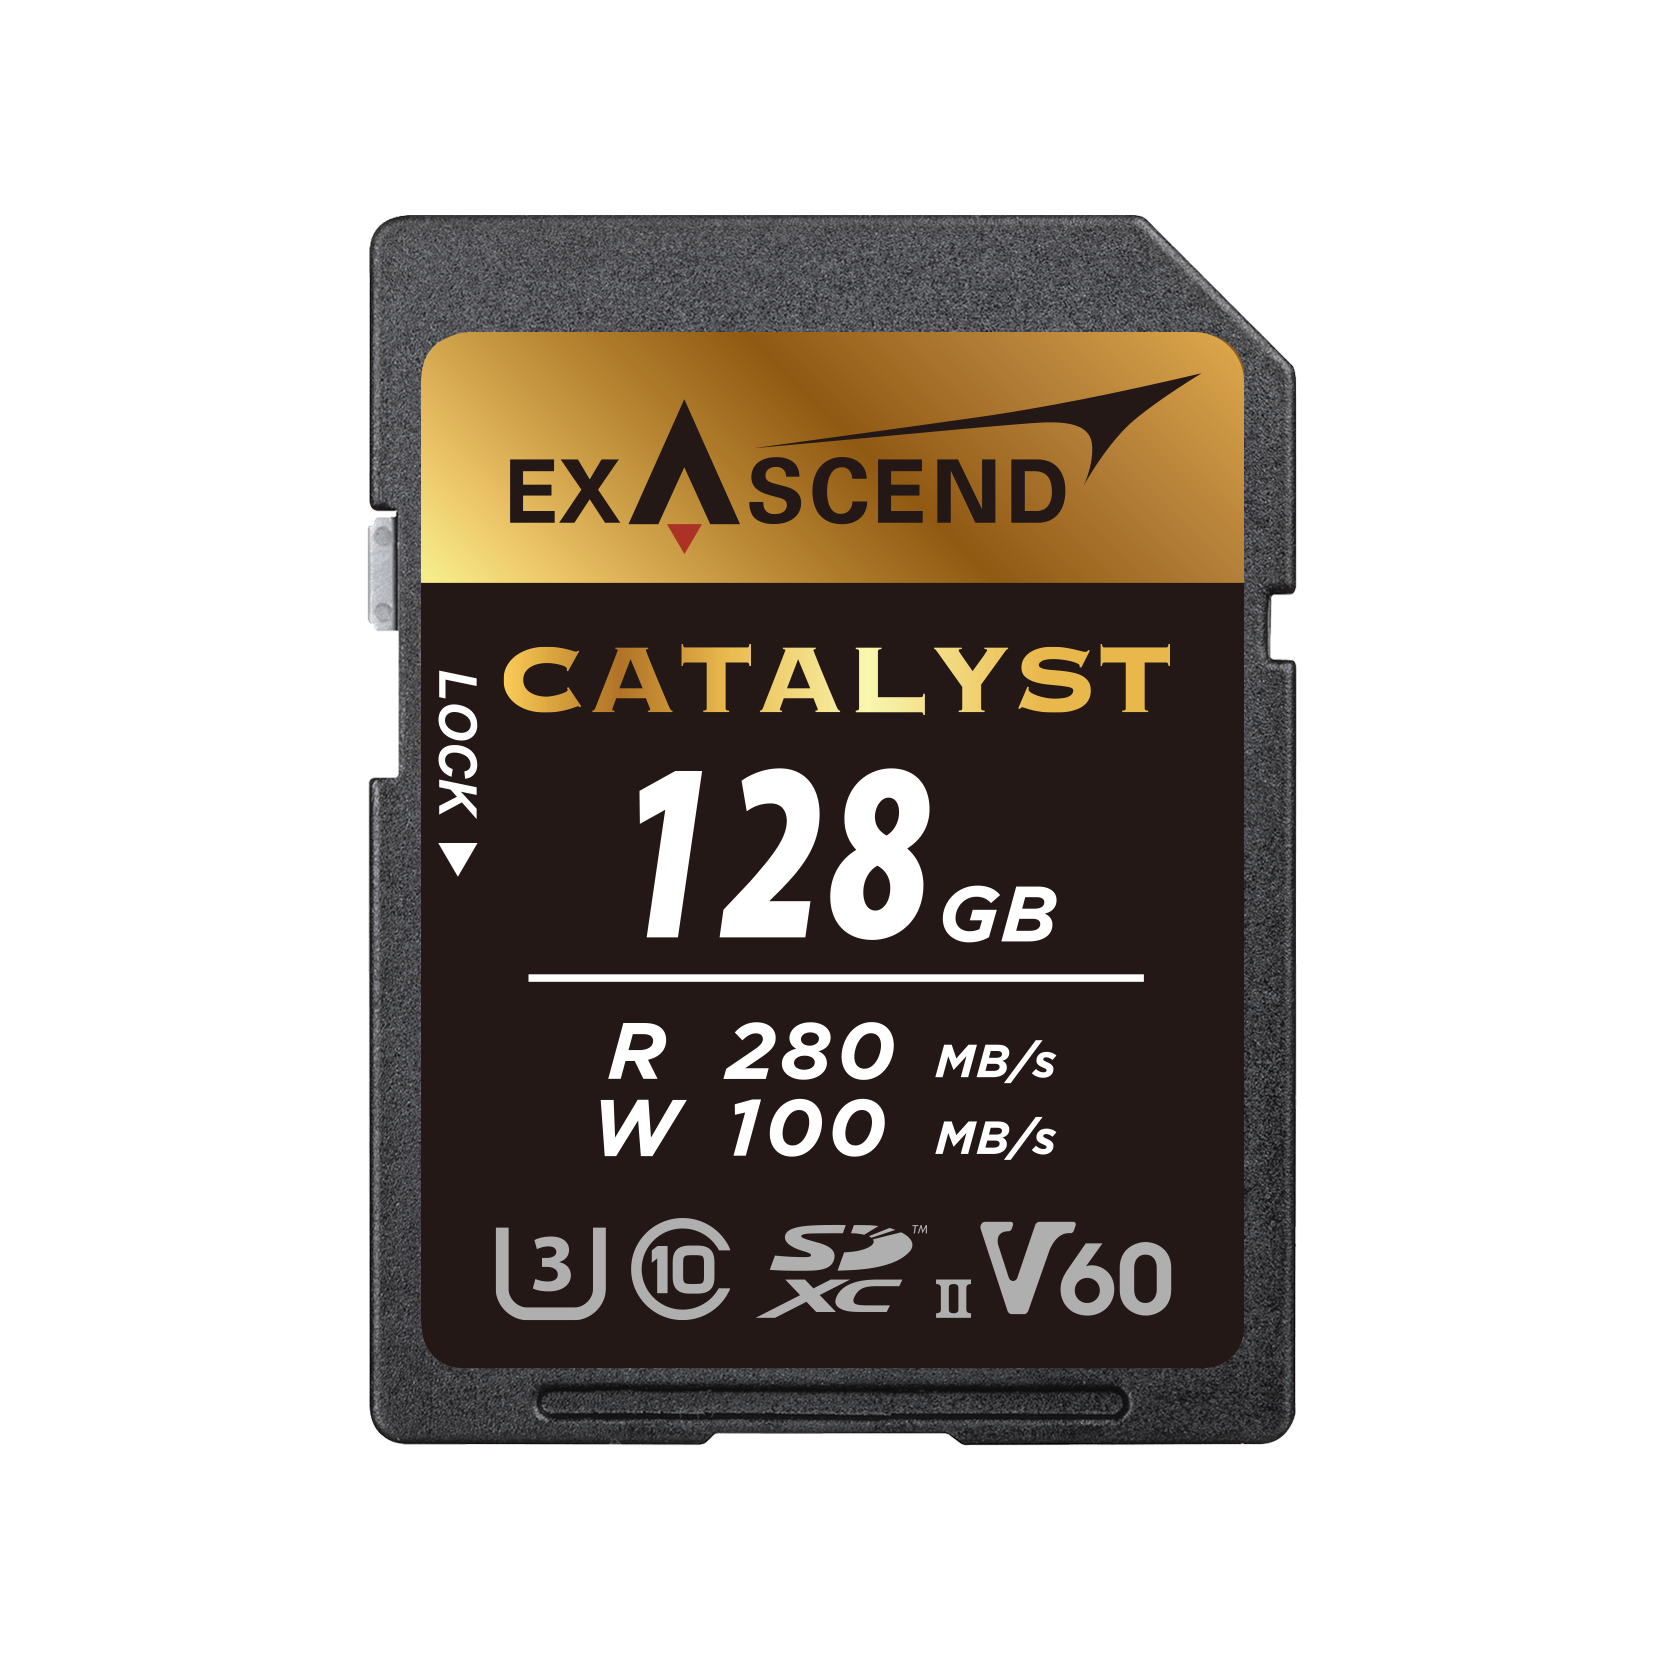 Catalyst V60 SD Card 128GB.png